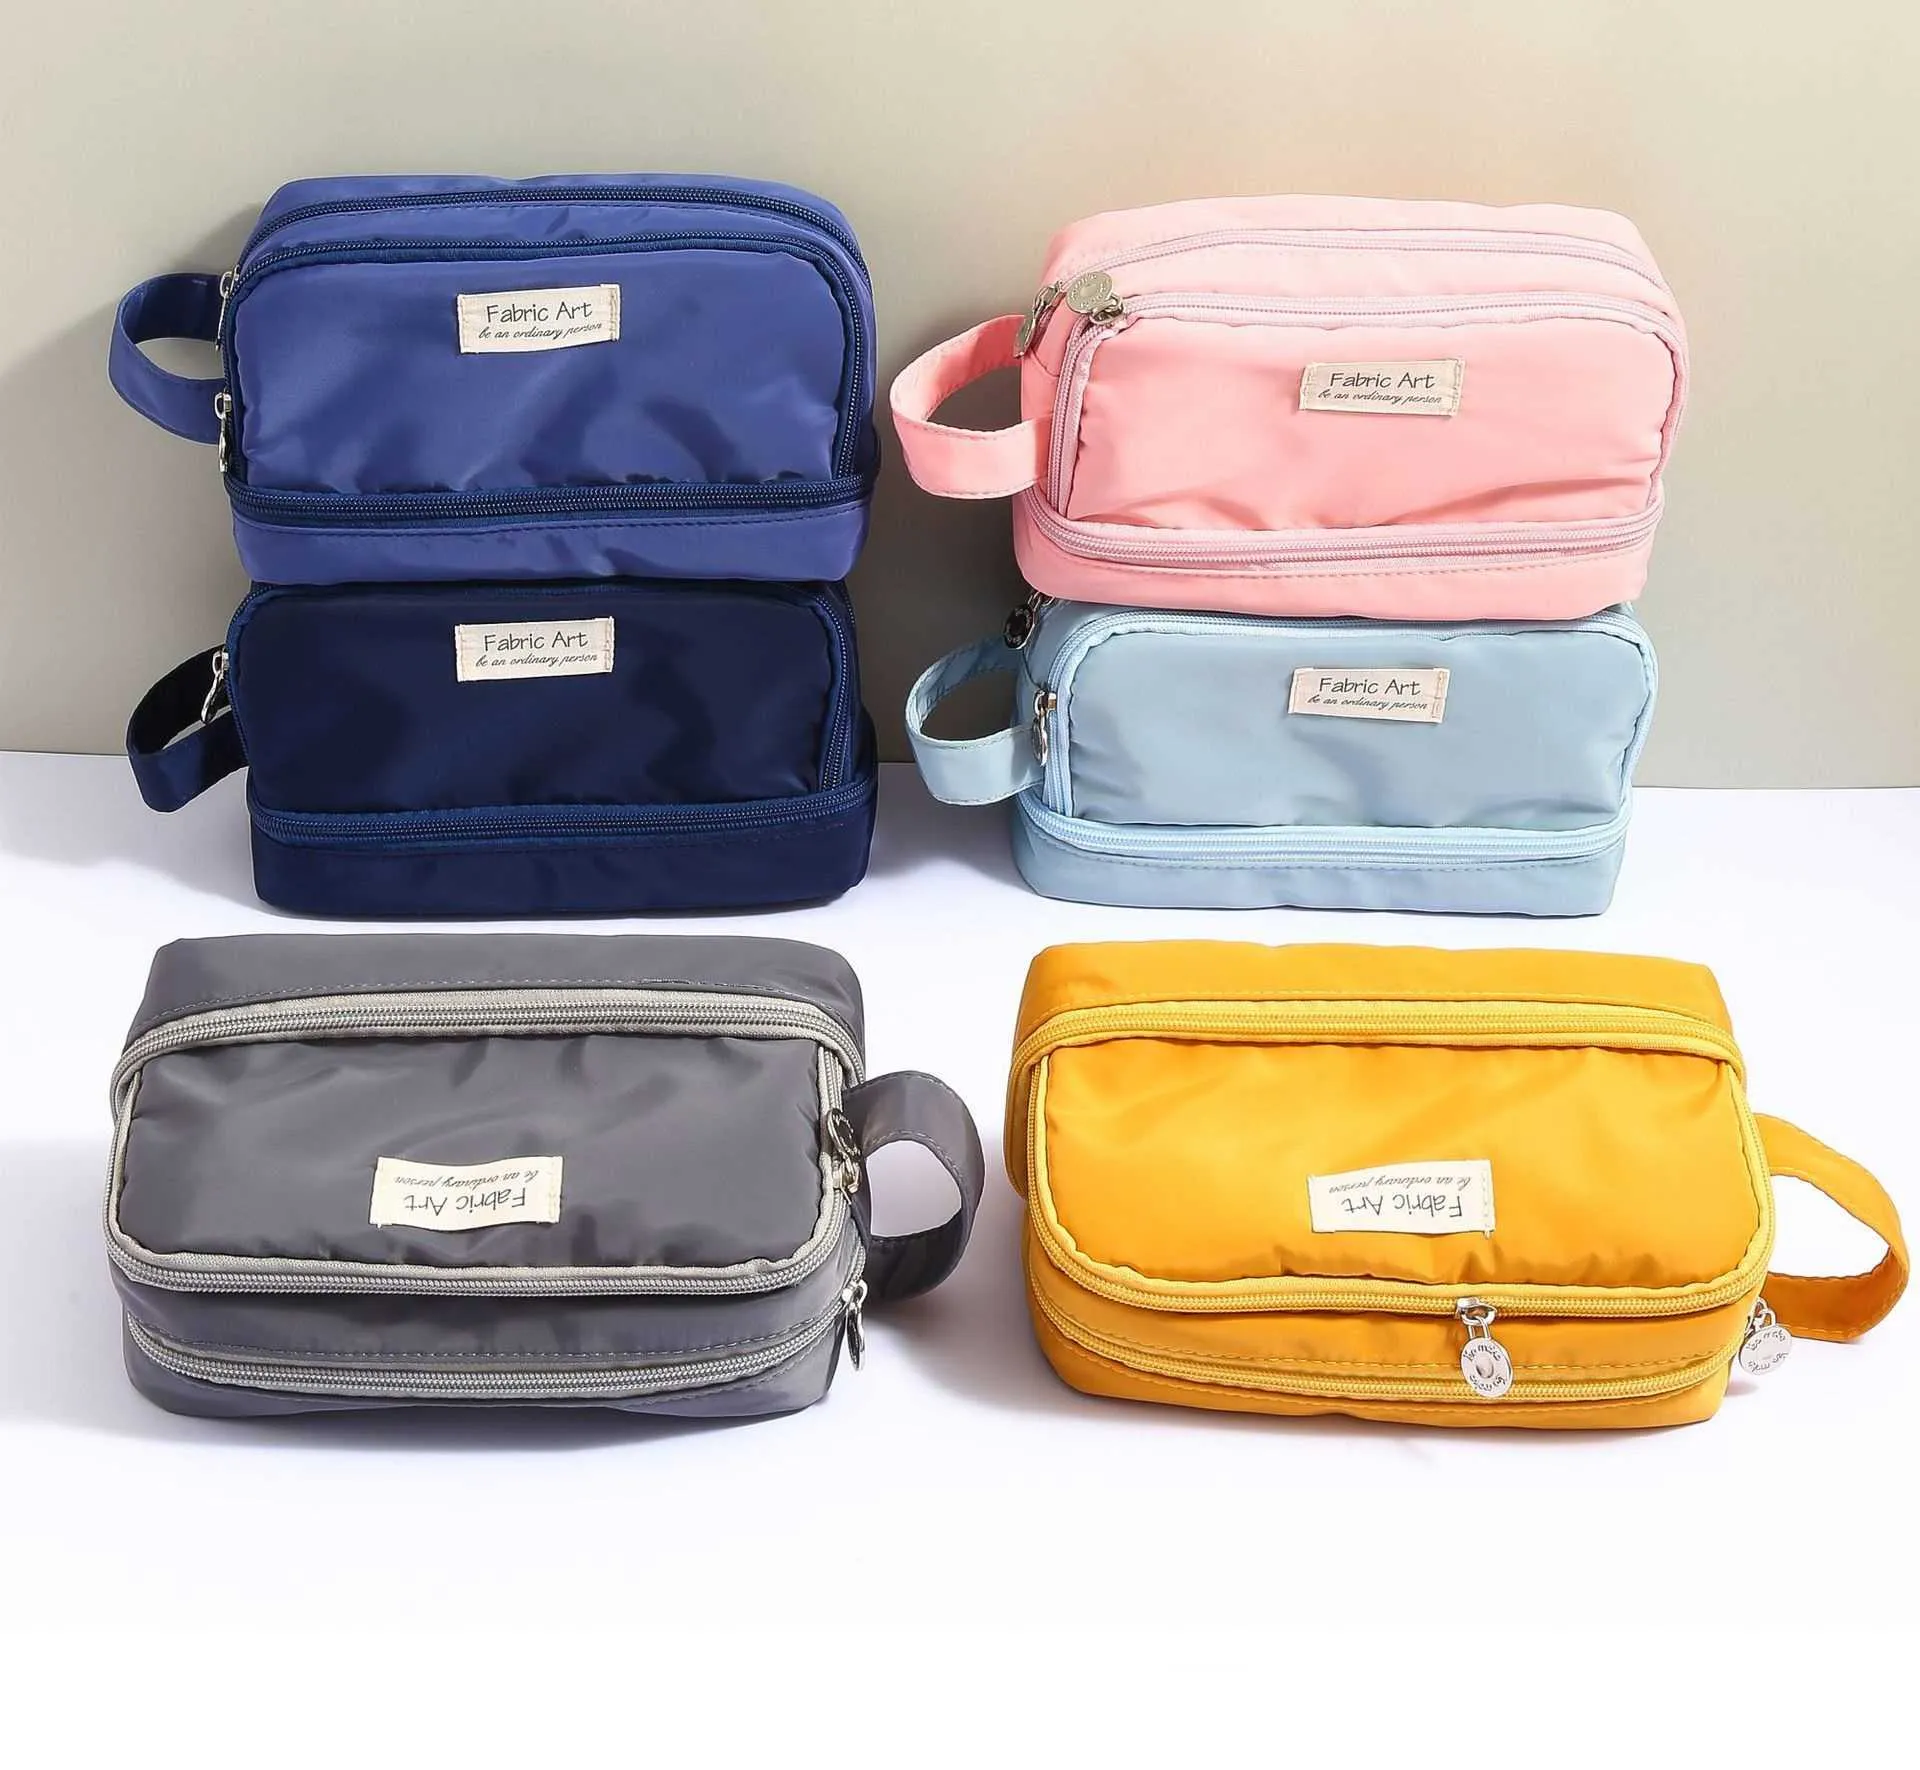 Wholesale 3 Layer Waterproof Fabric Stationery Pencil Case For Stationery,  School, And Travel A7248 HKD230831 From Flying_king18, $7.51